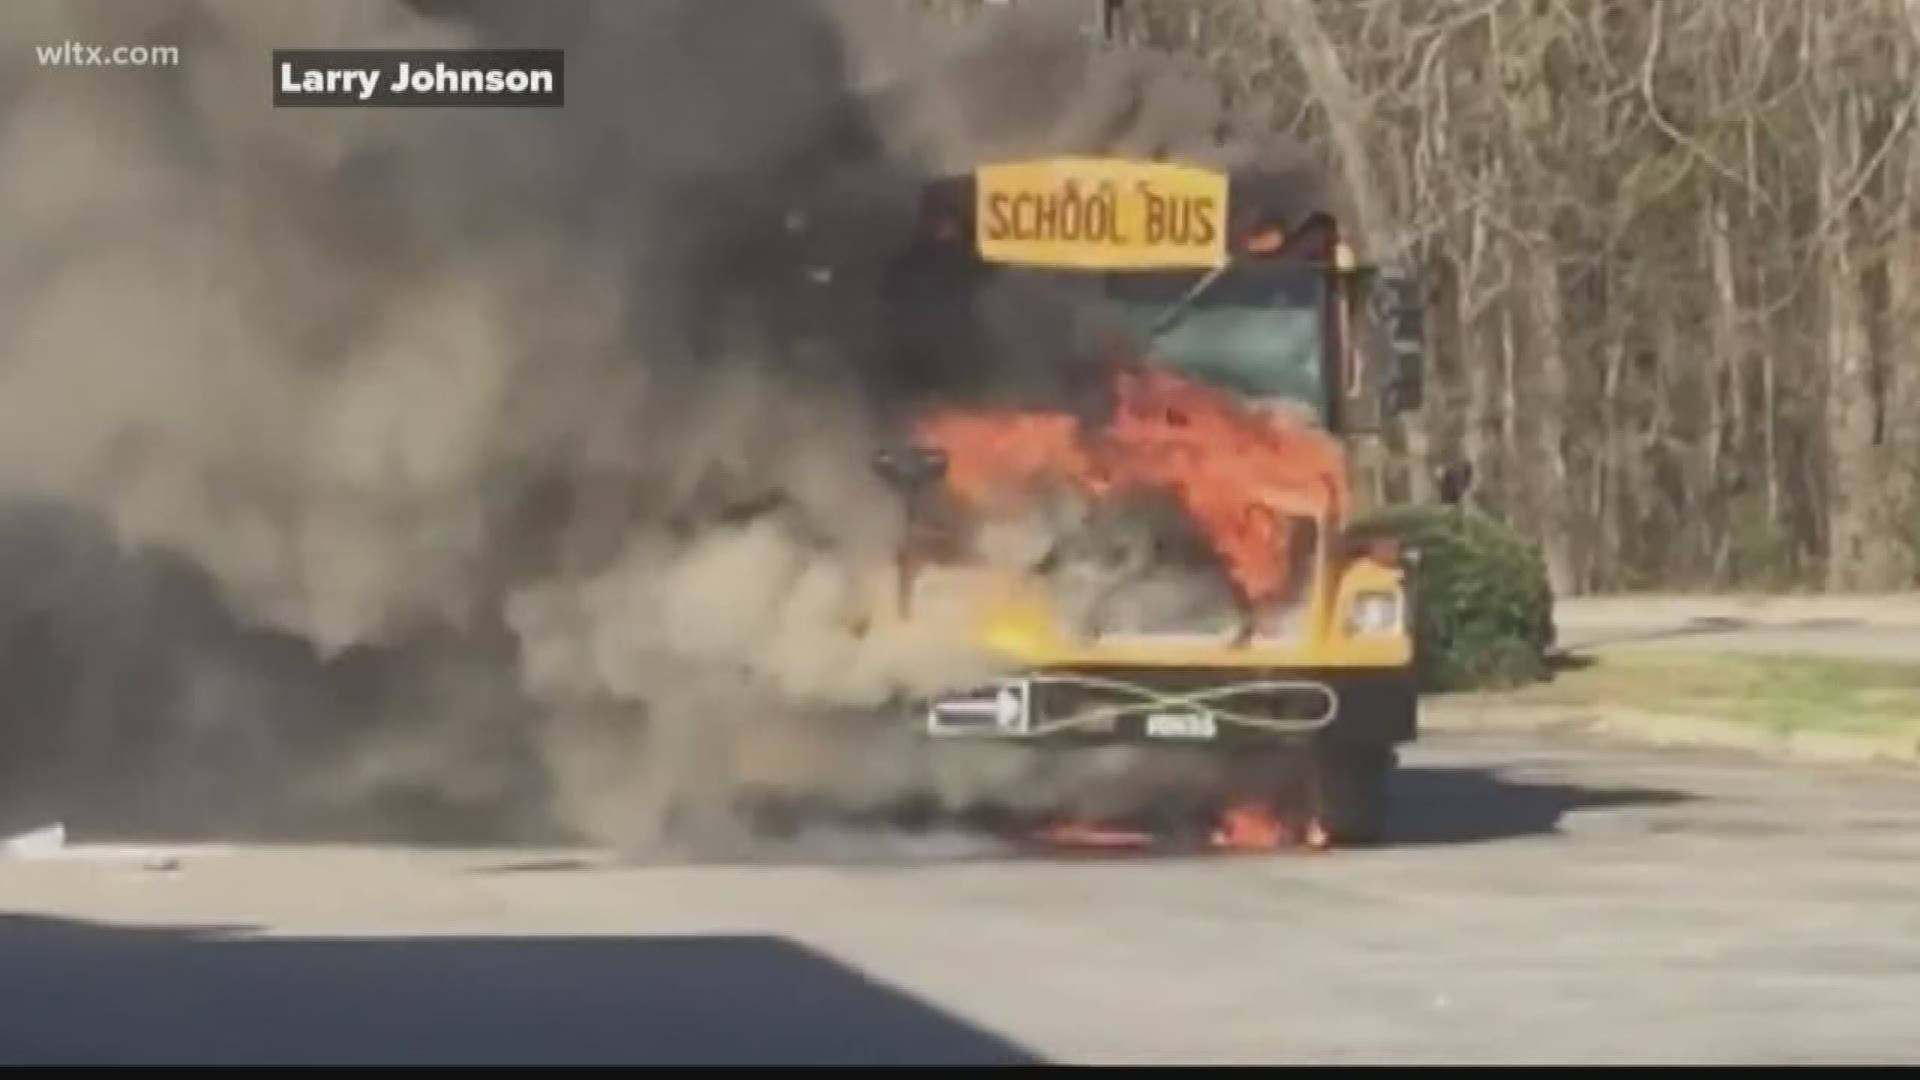 The dad who was on a field trip with his child when the school bus caught fire talks about what happened